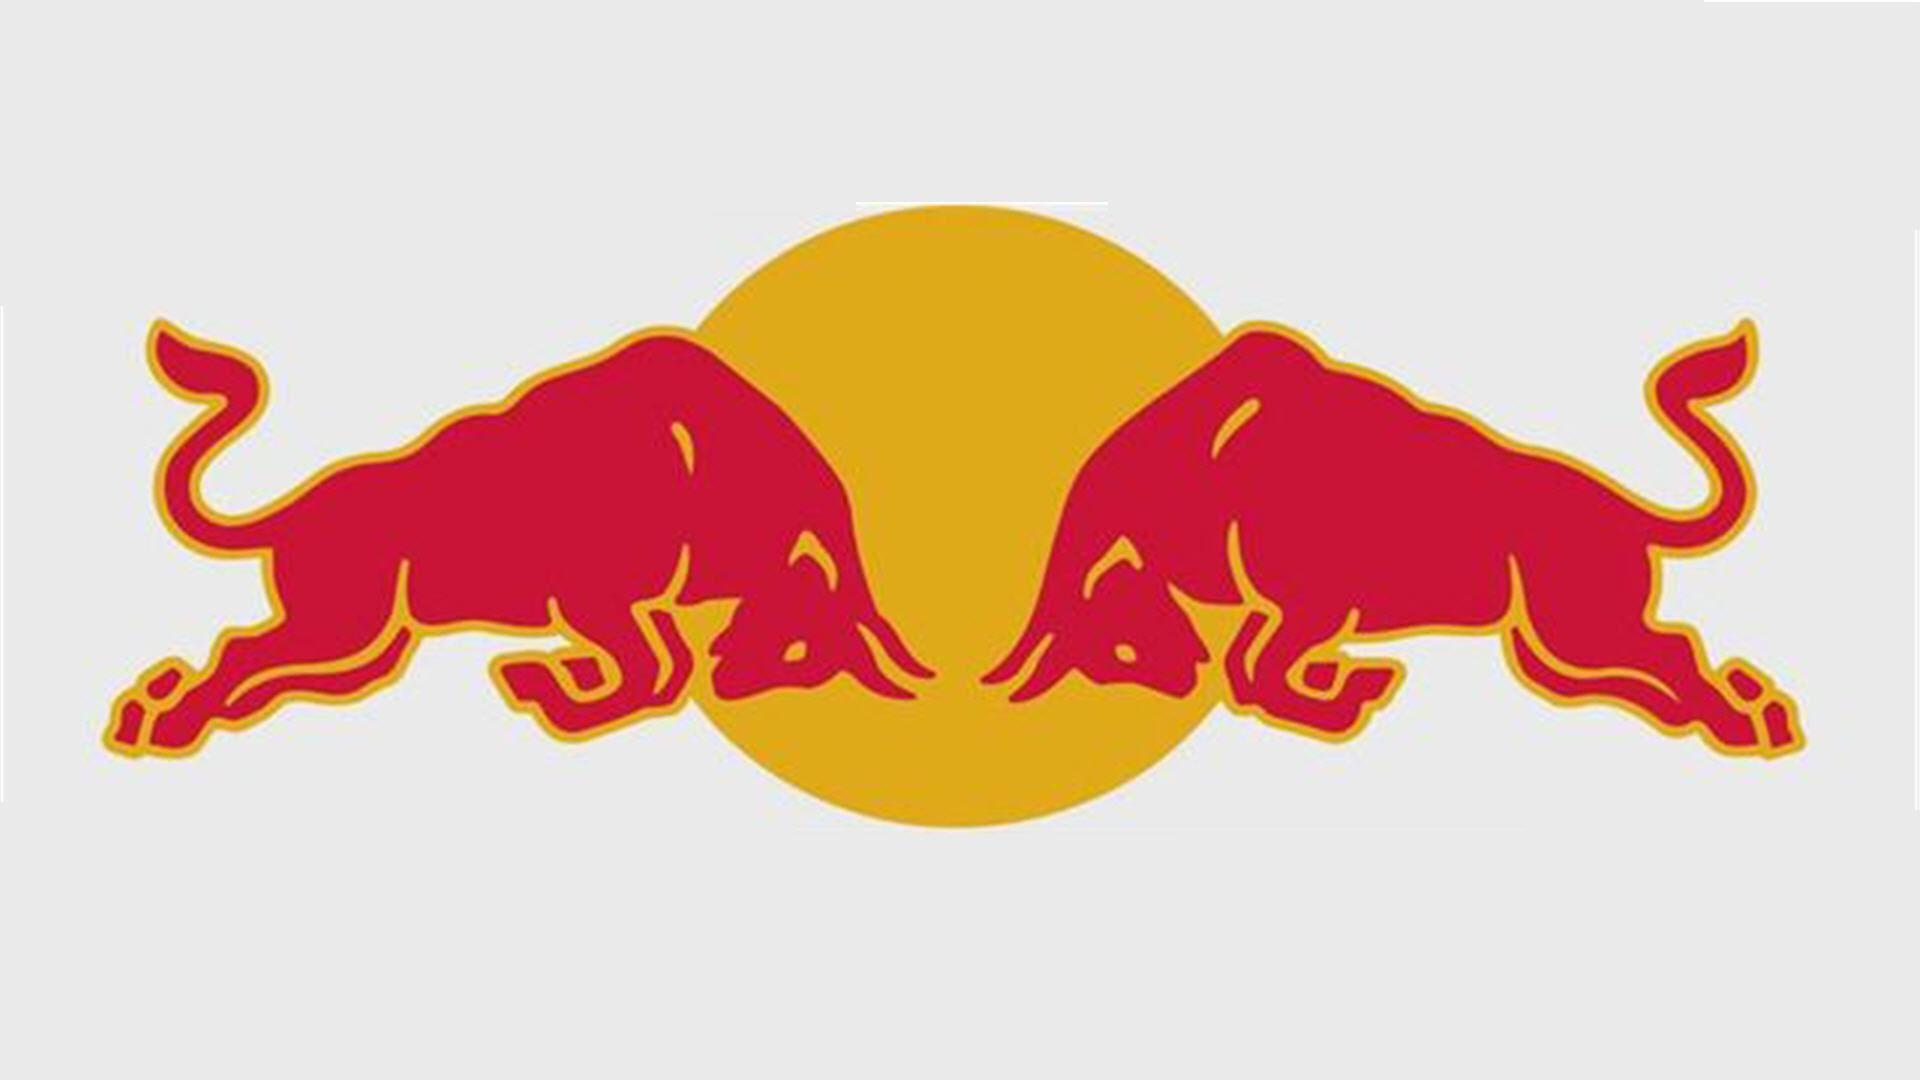 Amazing Logo Wallpaper HD Red Bull Image Gallery Free Download